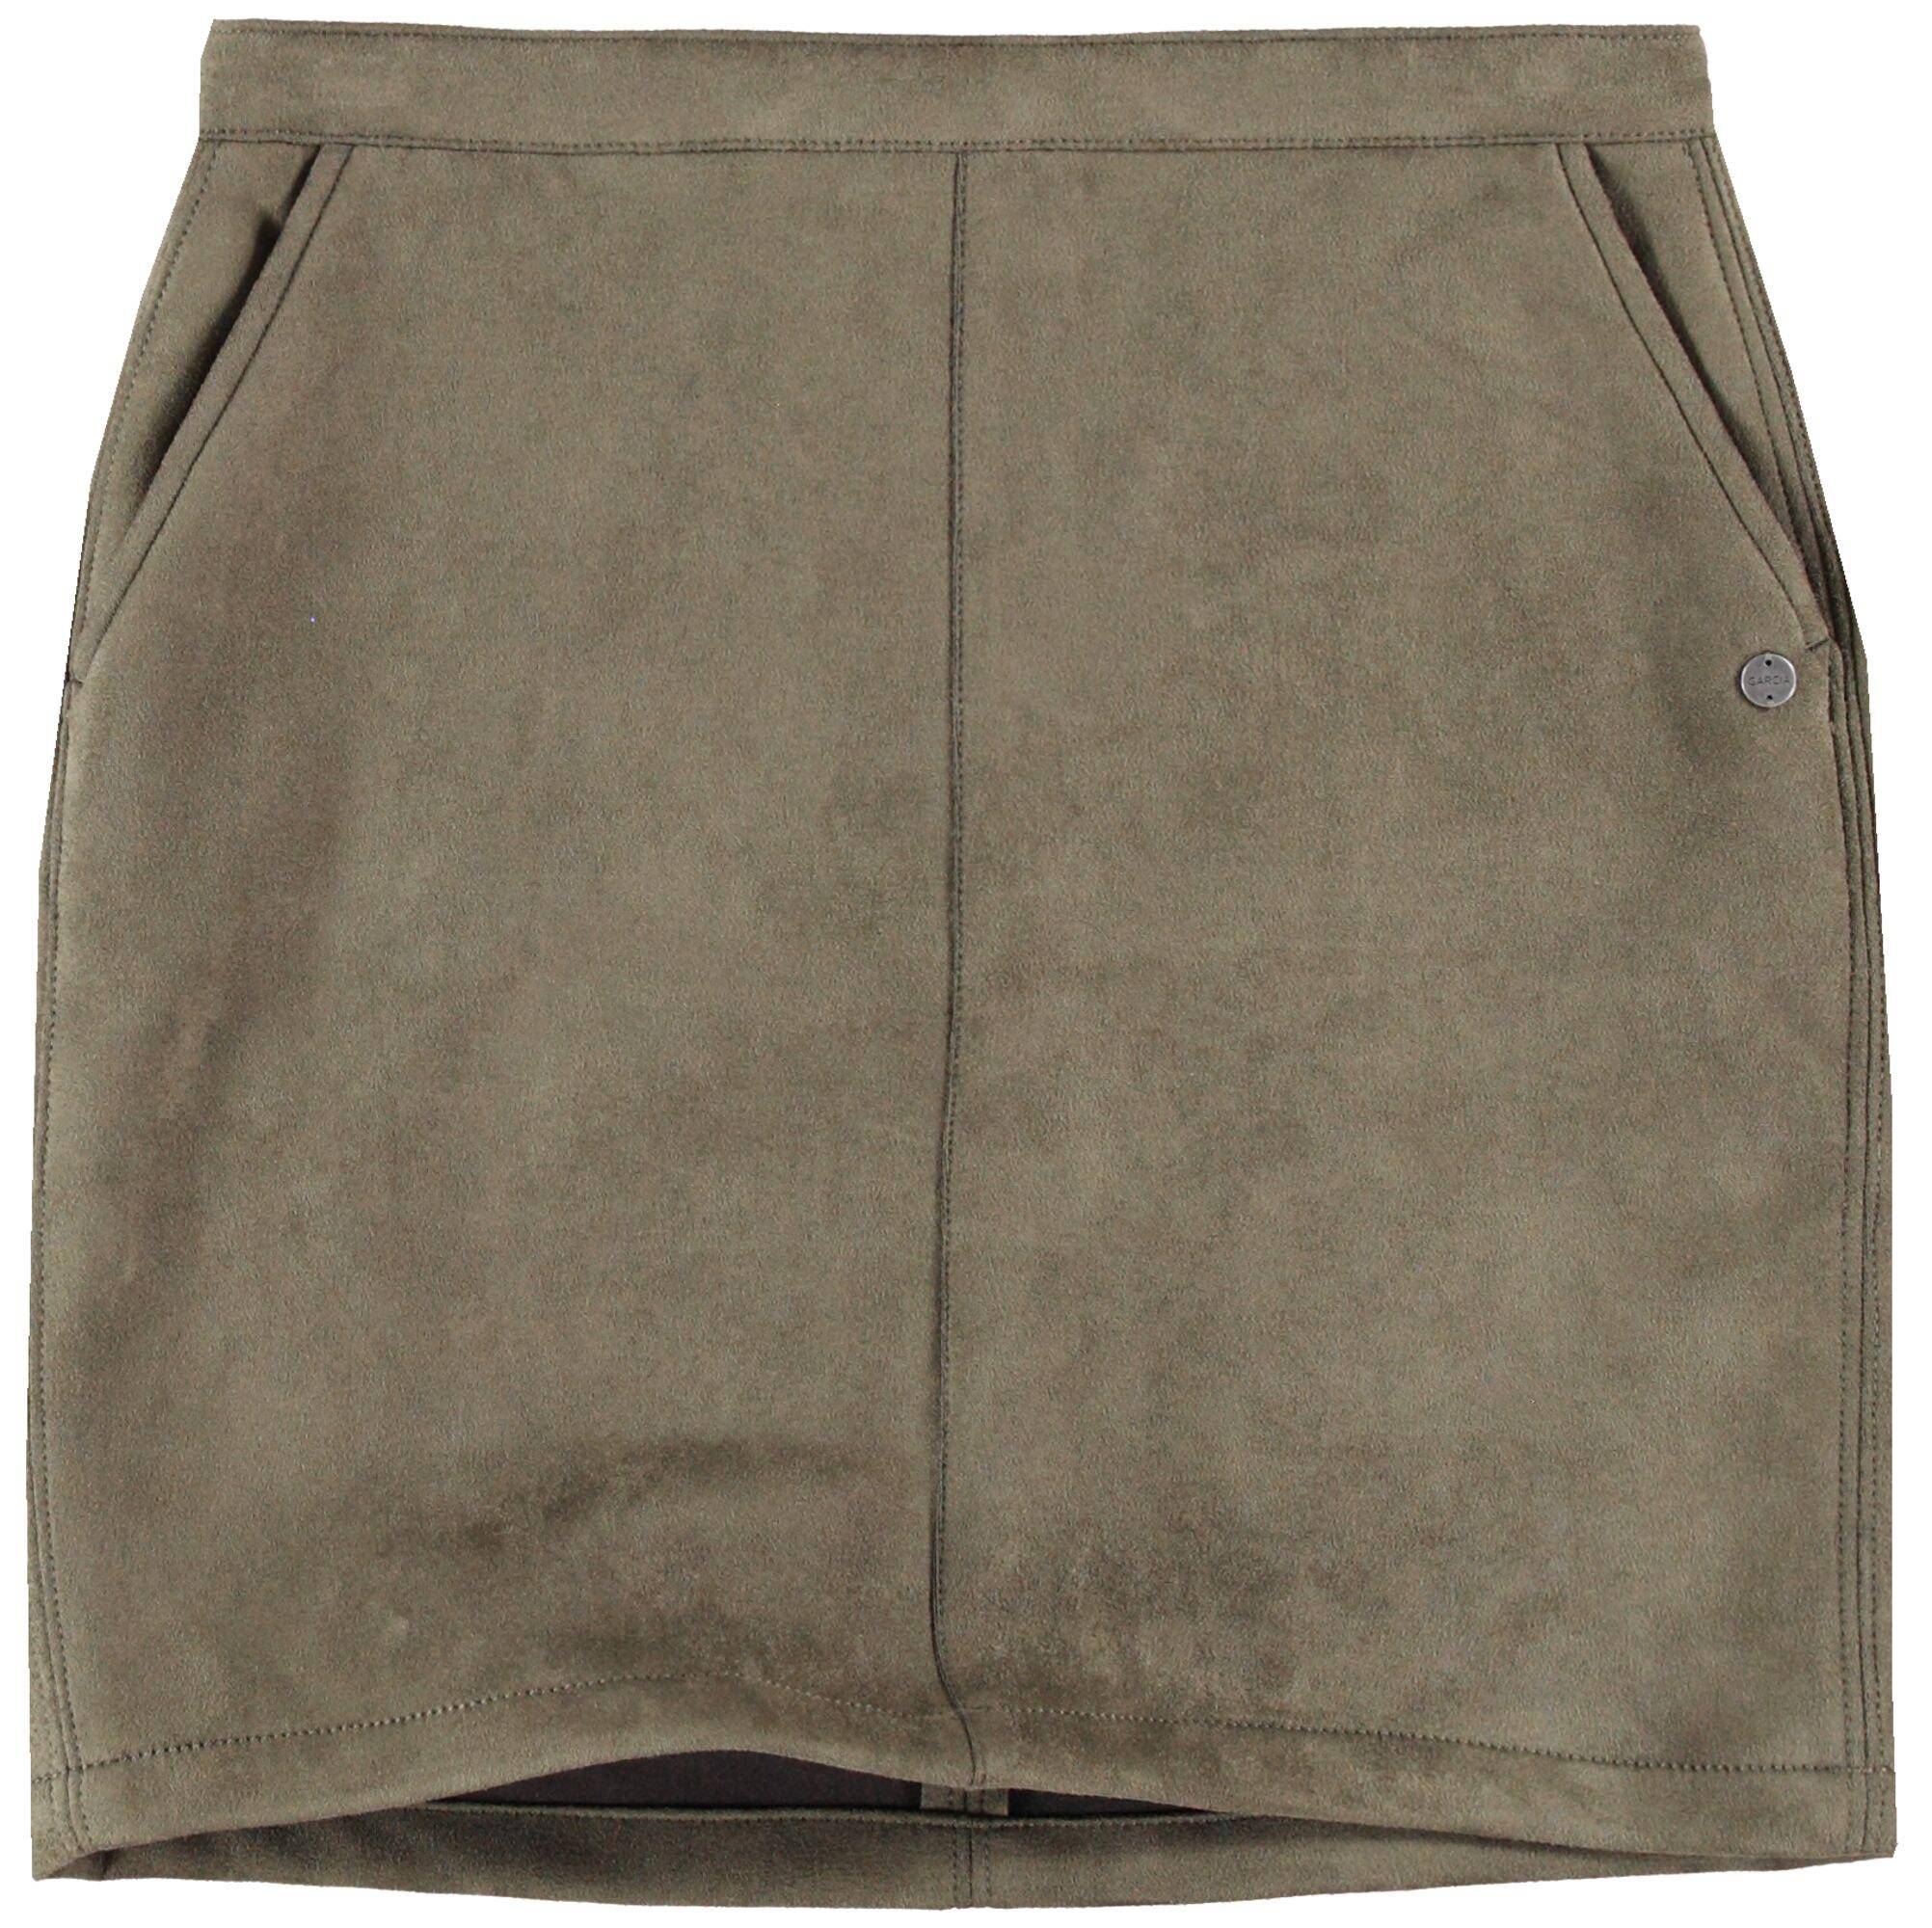 Army Green Garcia Skirt with Pockets - Your Style Your Story